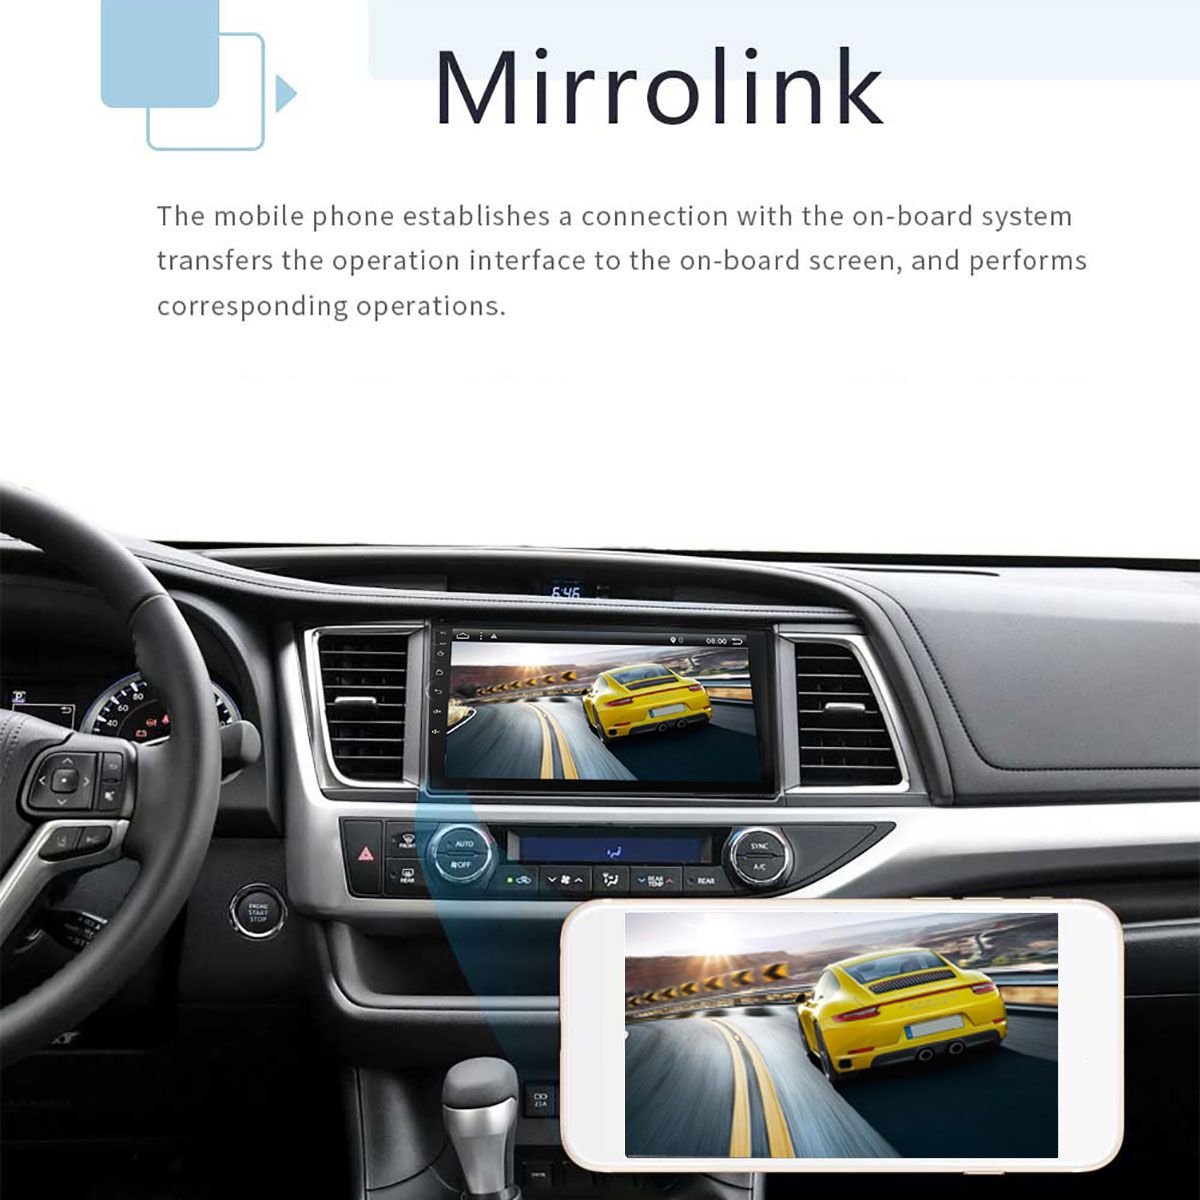 PX6-101-Inch-1-DIN-432G-for-Android-90-Car-MP5-Player-8-Core-Touch-Screen-bluetooth-RDS-Radio-GPS-wi-1497288